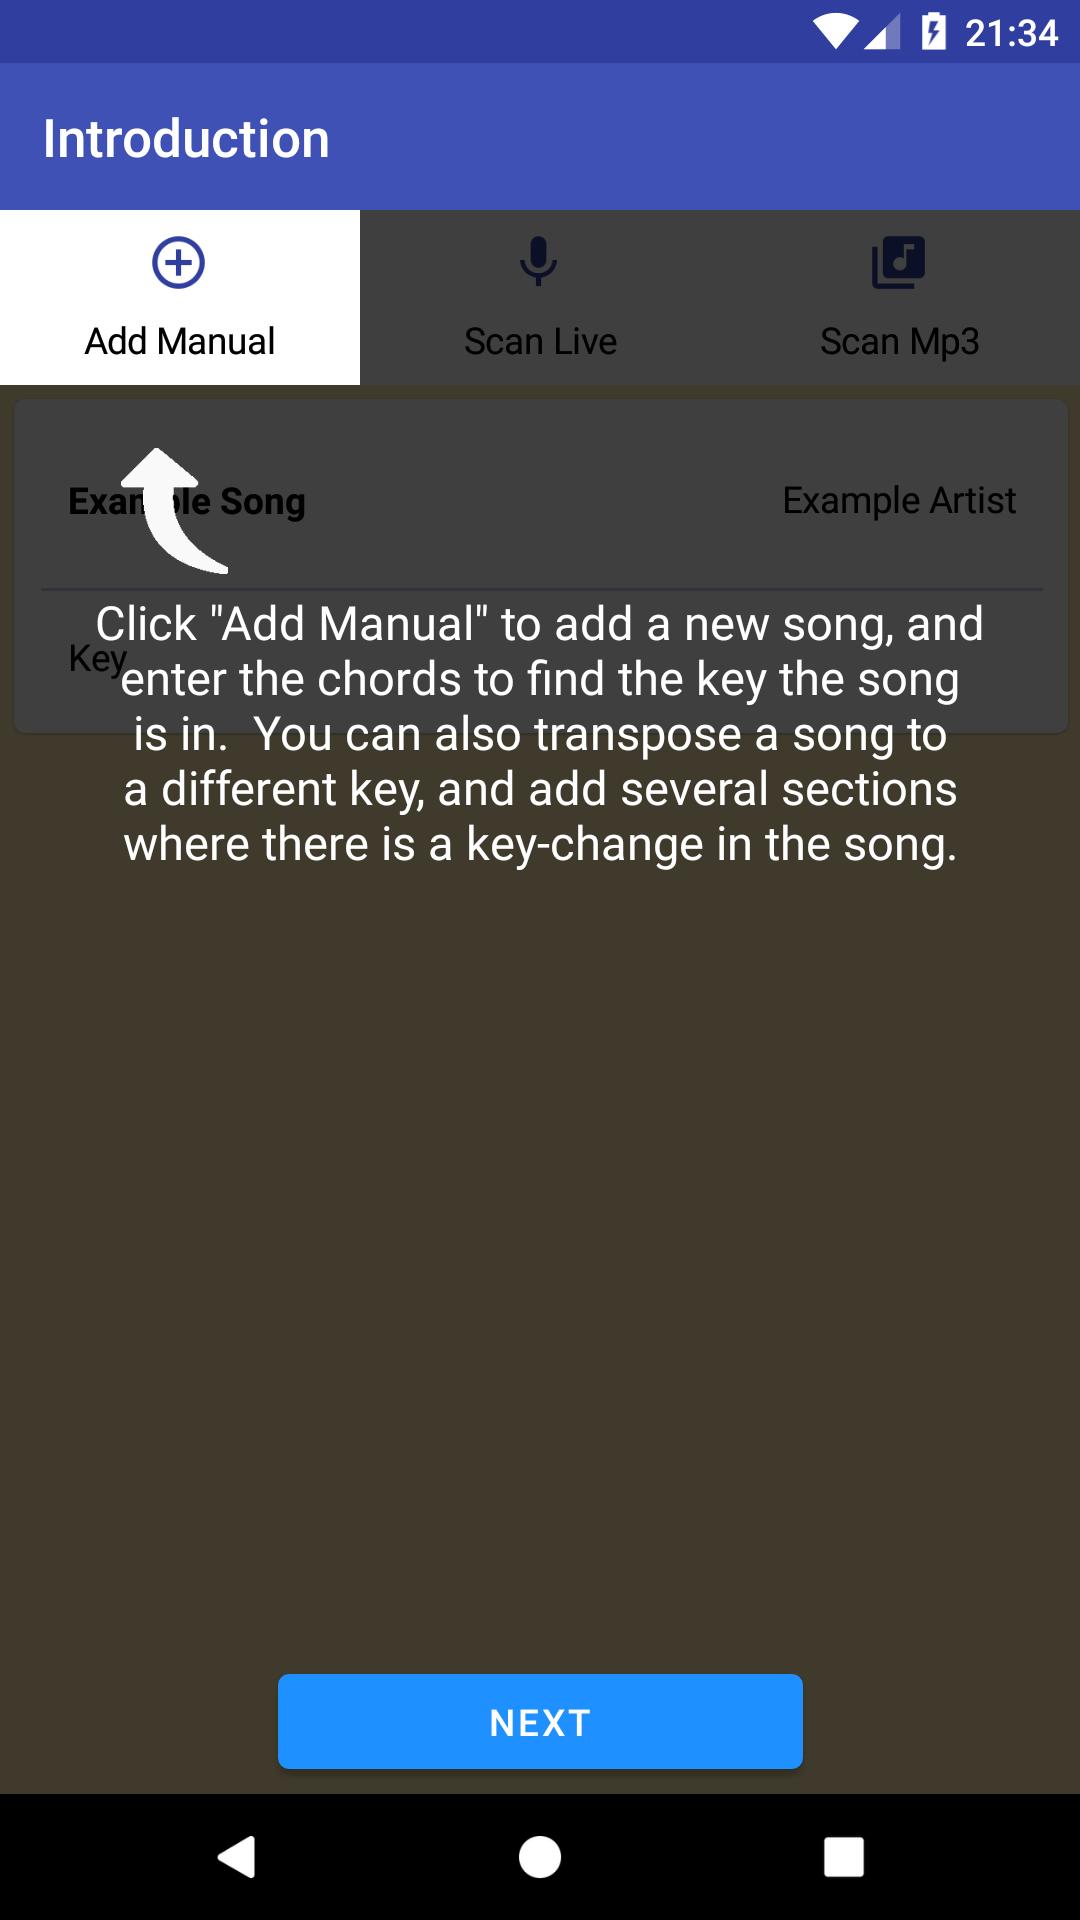 Song Key Finder APK for Android Download